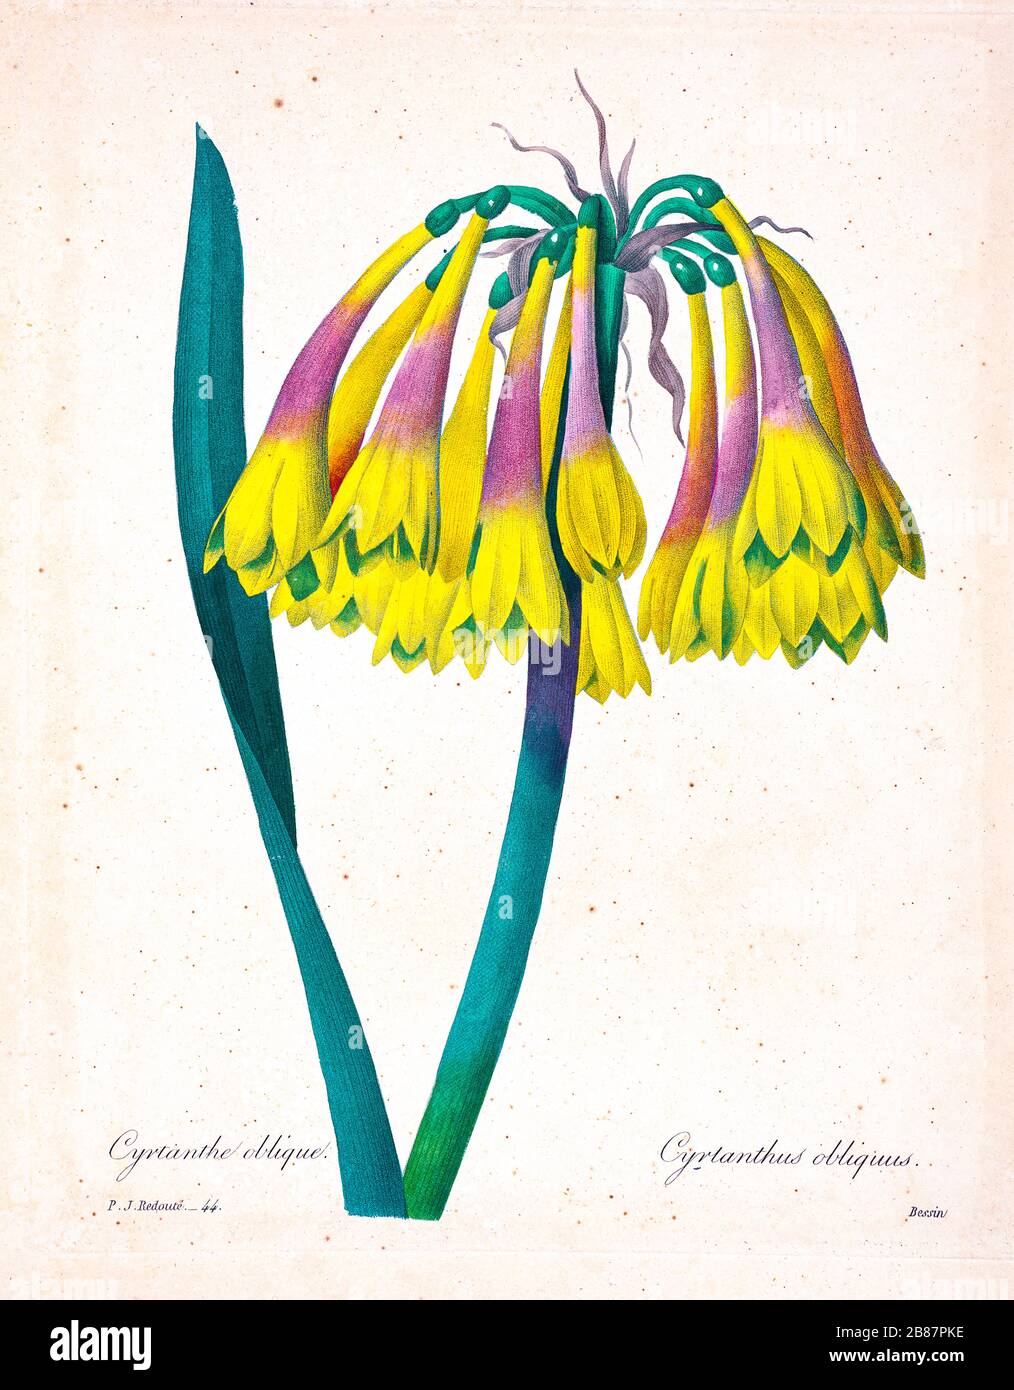 19th-century hand painted Engraving illustration of a Cyrtanthus obliquus, the Knysna lily, is a species of plant in the amaryllis family with spiraling leaves and large pendulous flowers. by Pierre-Joseph Redoute. Published in Choix Des Plus Belles Fleurs, Paris (1827). by Redouté, Pierre Joseph, 1759-1840.; Chapuis, Jean Baptiste.; Ernest Panckoucke.; Langois, Dr.; Bessin, R.; Victor, fl. ca. 1820-1850. Stock Photo